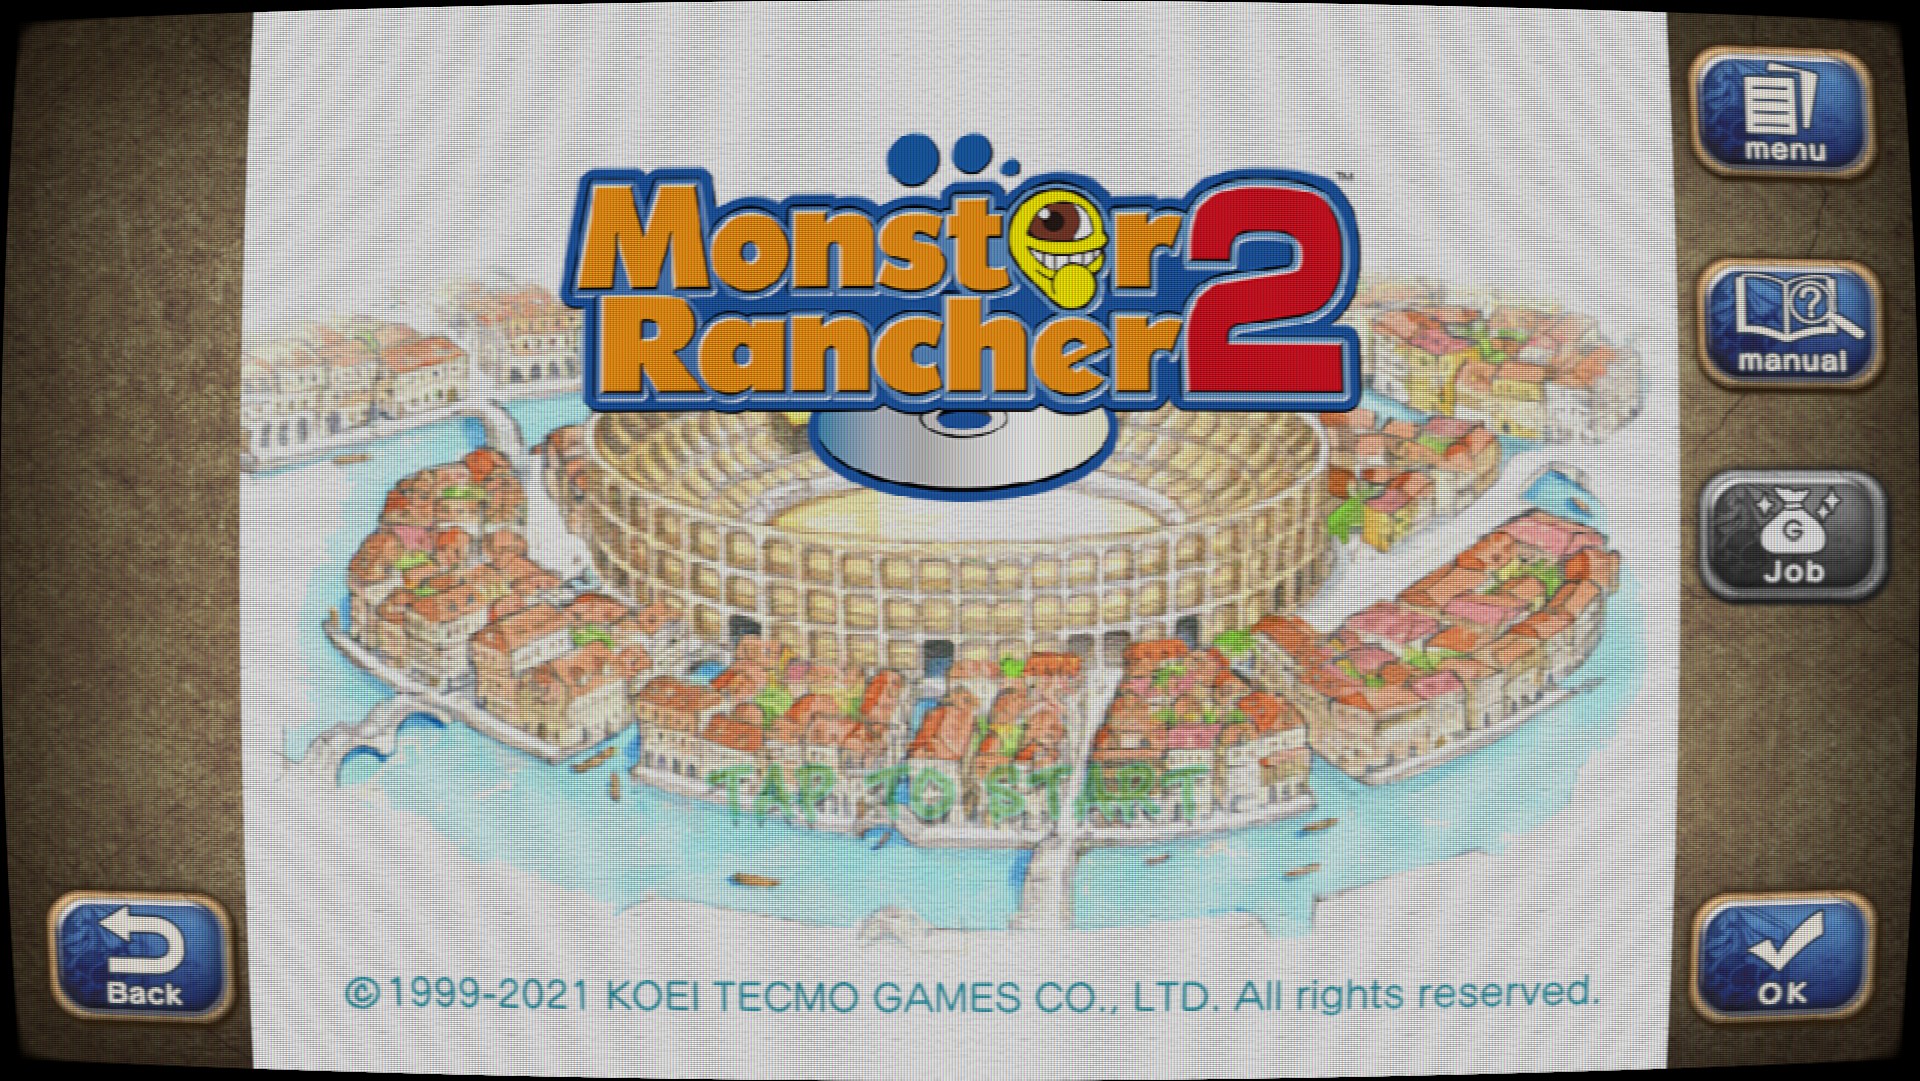 Monster Rancher 1 & 2 DX - How to Play Monster Rancher on TV Guide - Preview - 05CAFD6